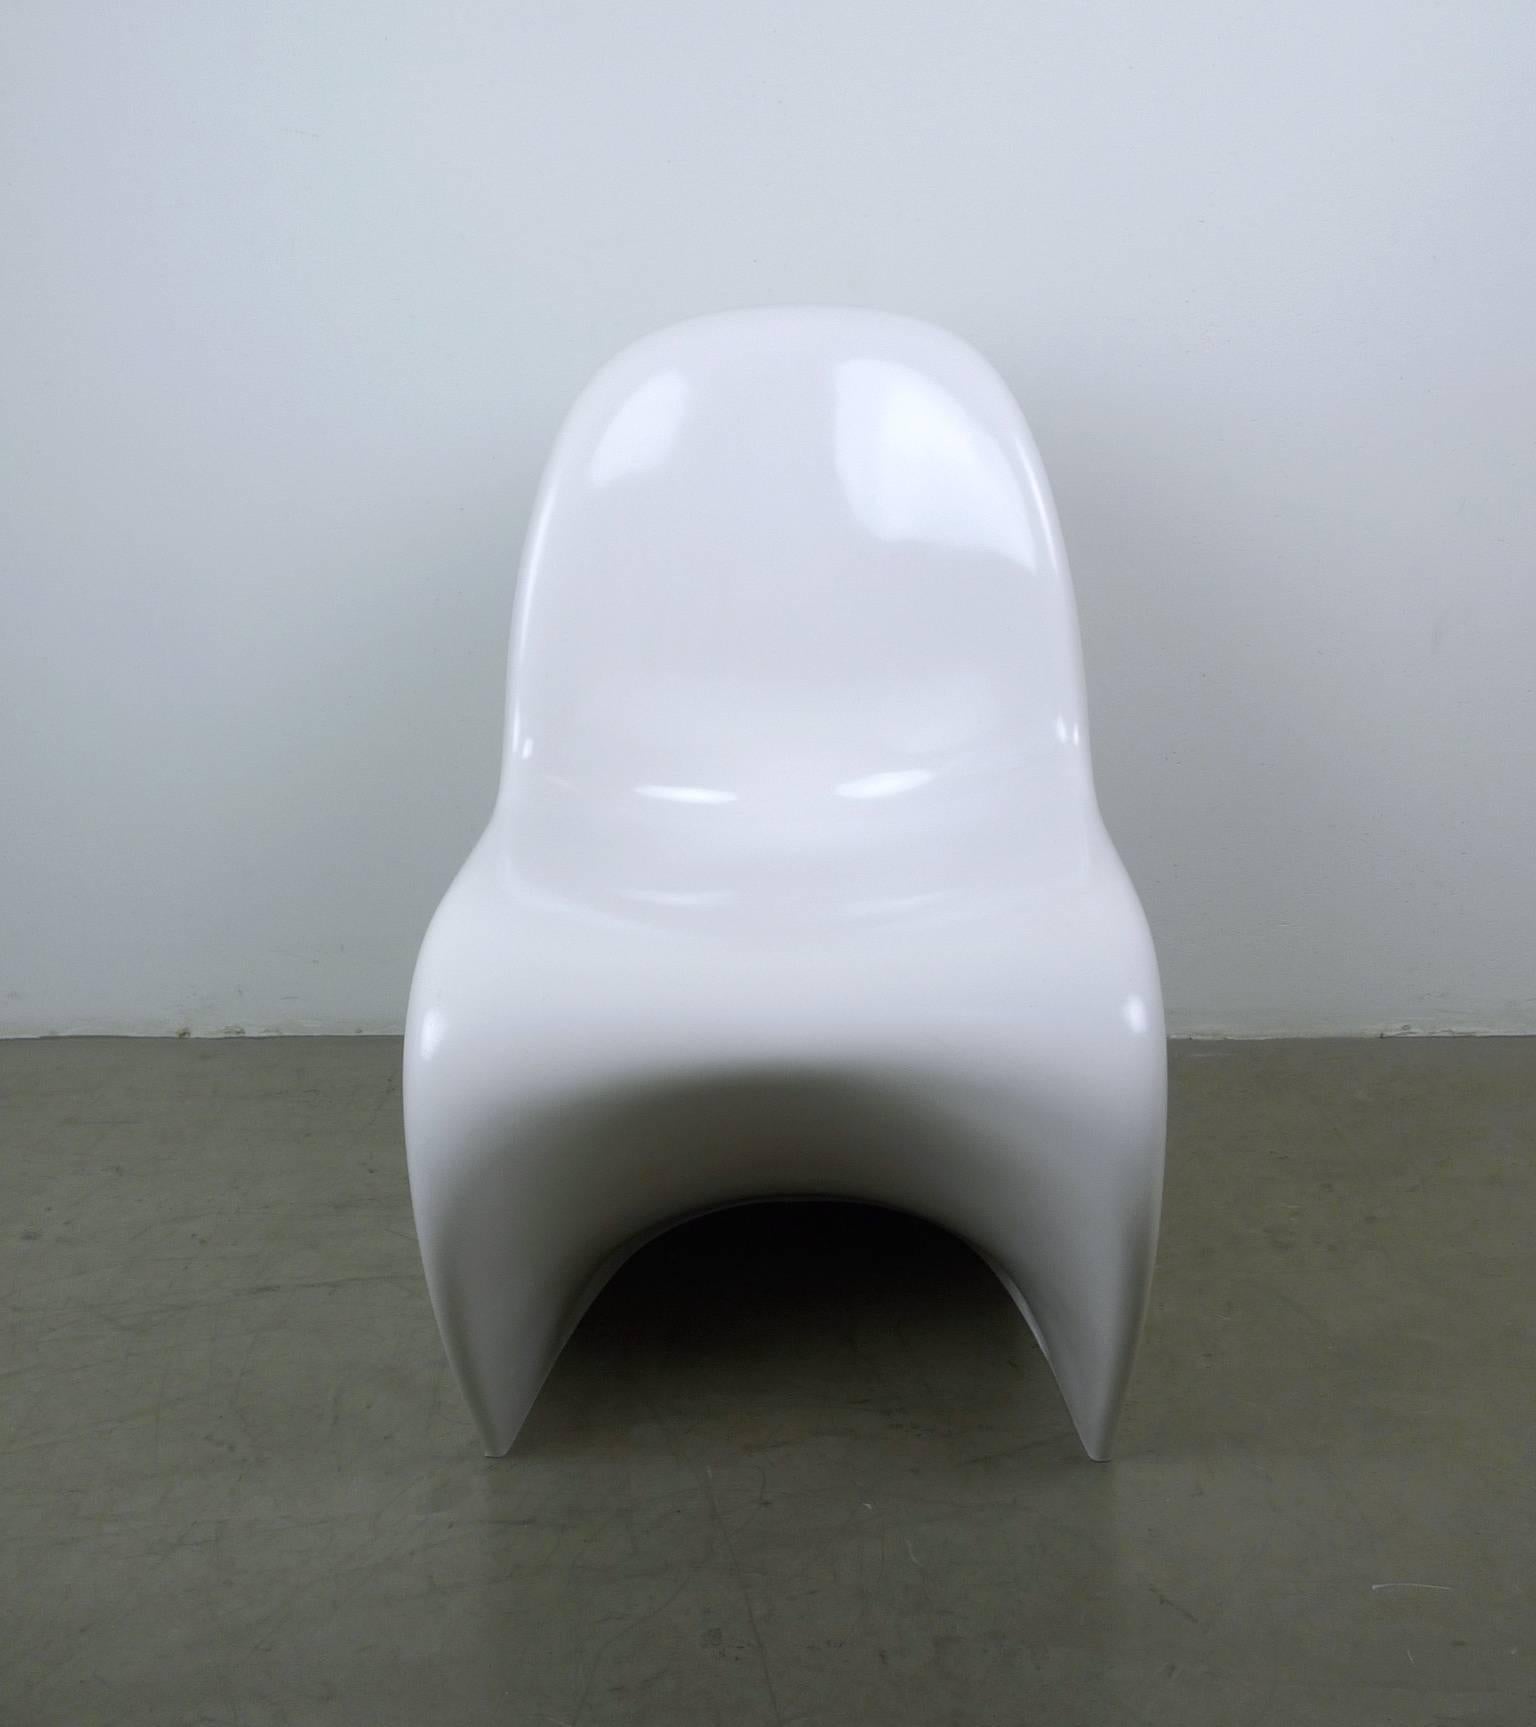 Pair of White Panton Chairs by Verner Panton for Fehlbau from 1971 and 1972 For Sale 3